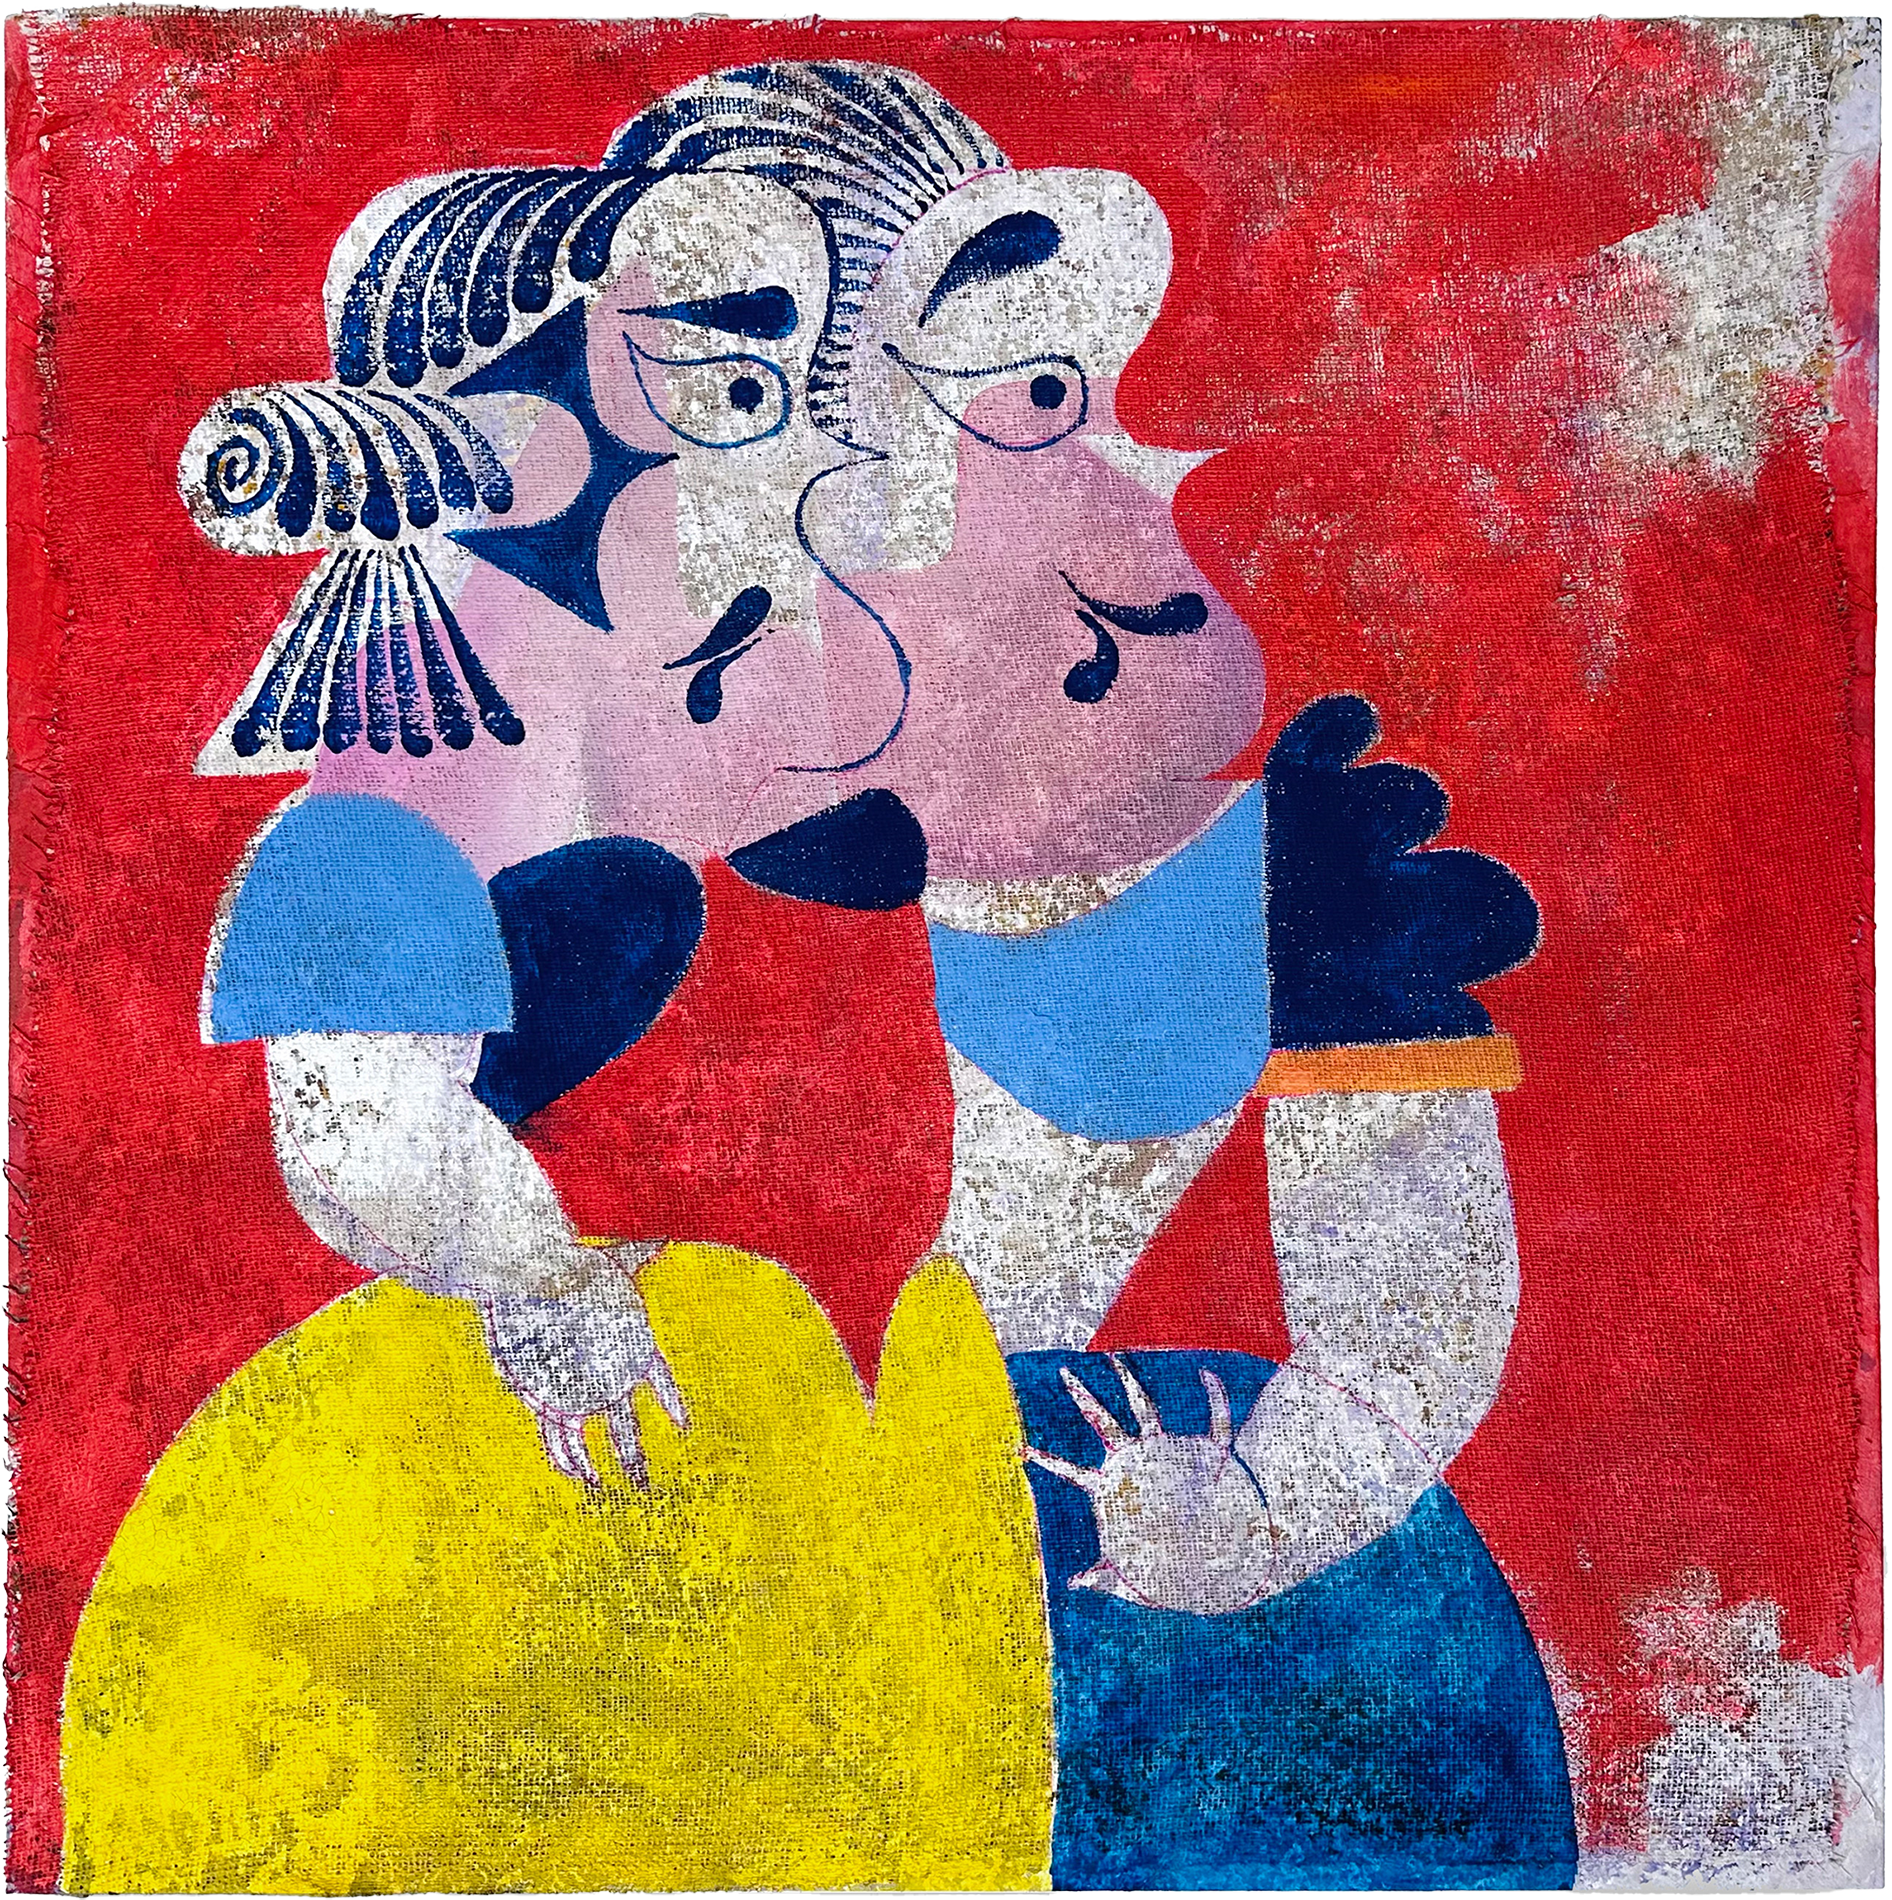 An abstracted, semi-joint portrait of Snow White against a bright red backdrop by the artist Guzzo Pinc